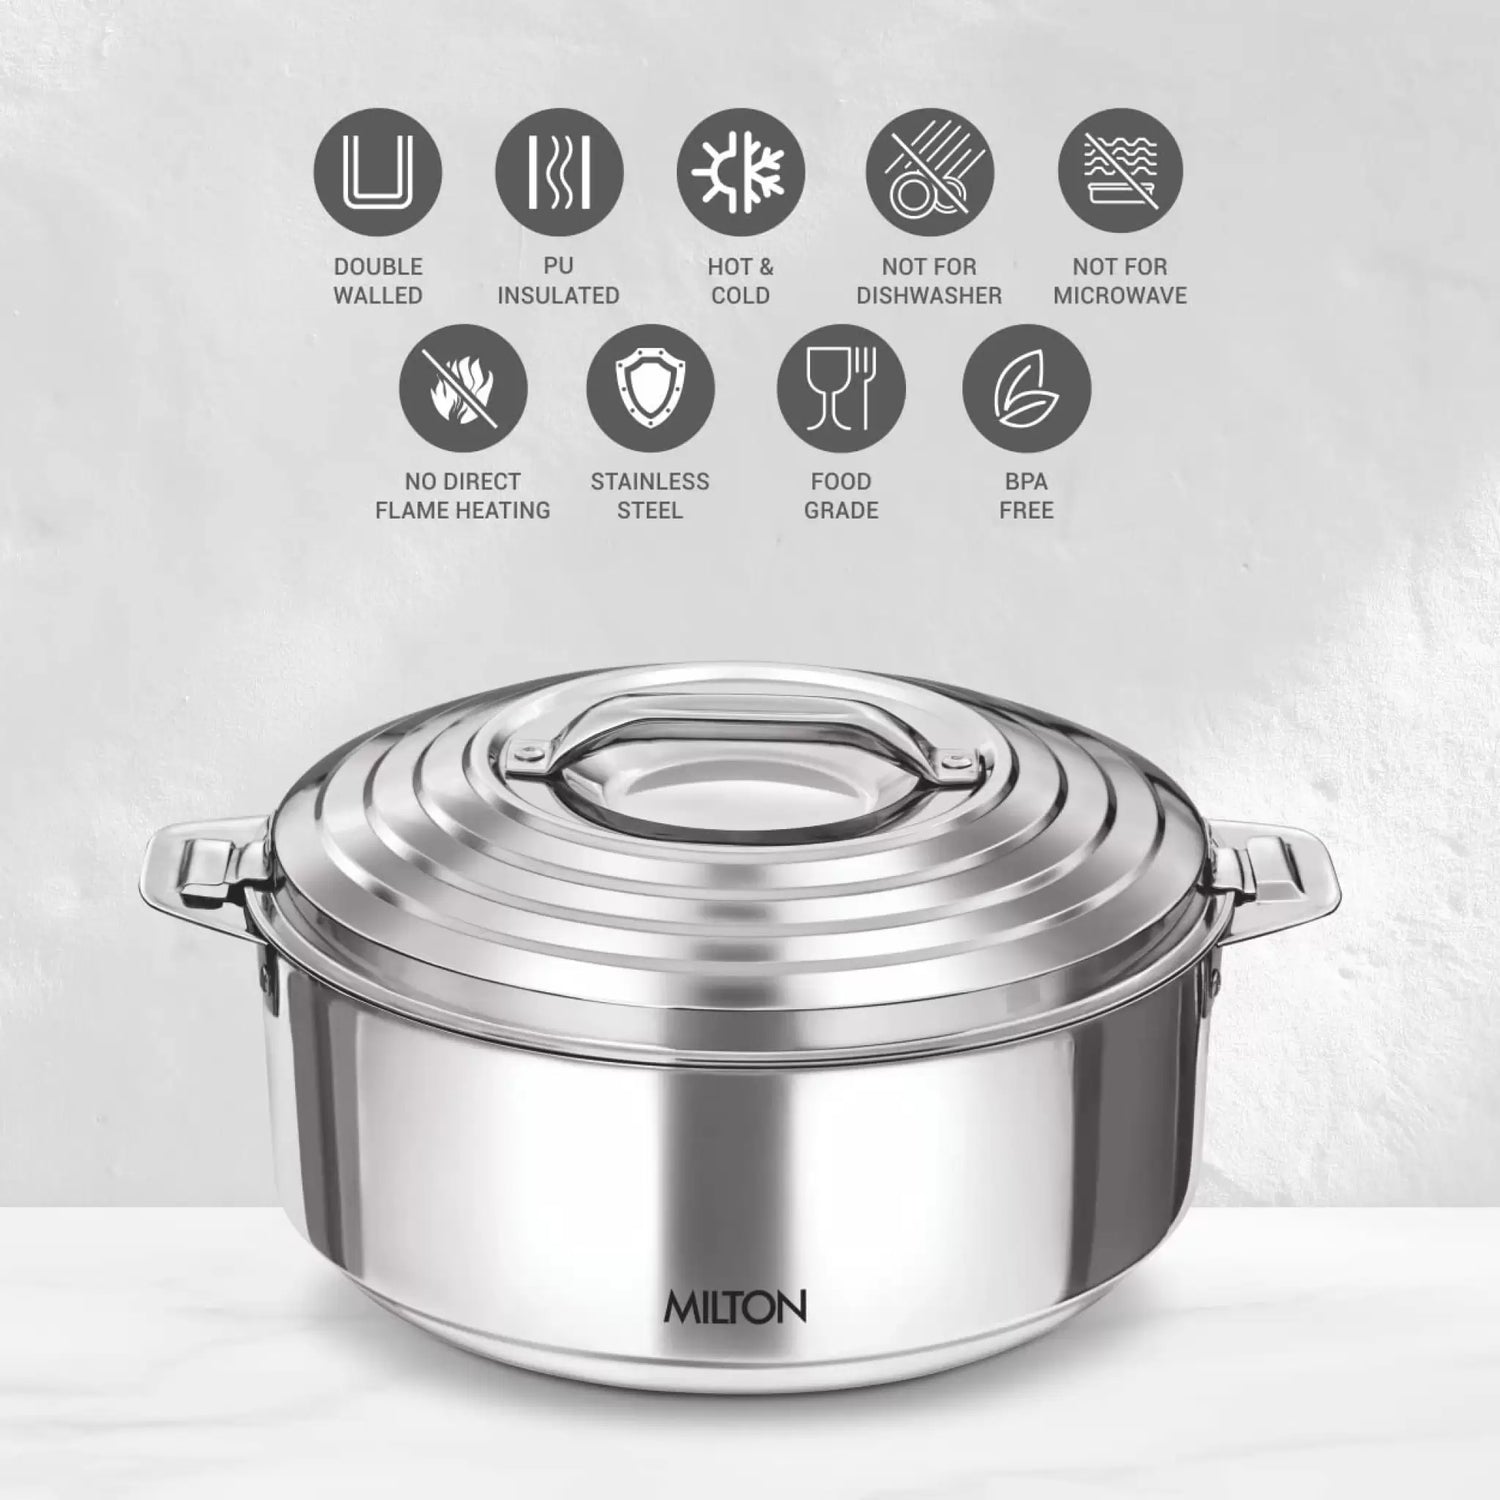 Milton Galaxia 1000 Insulated Stainless Steel Casserole